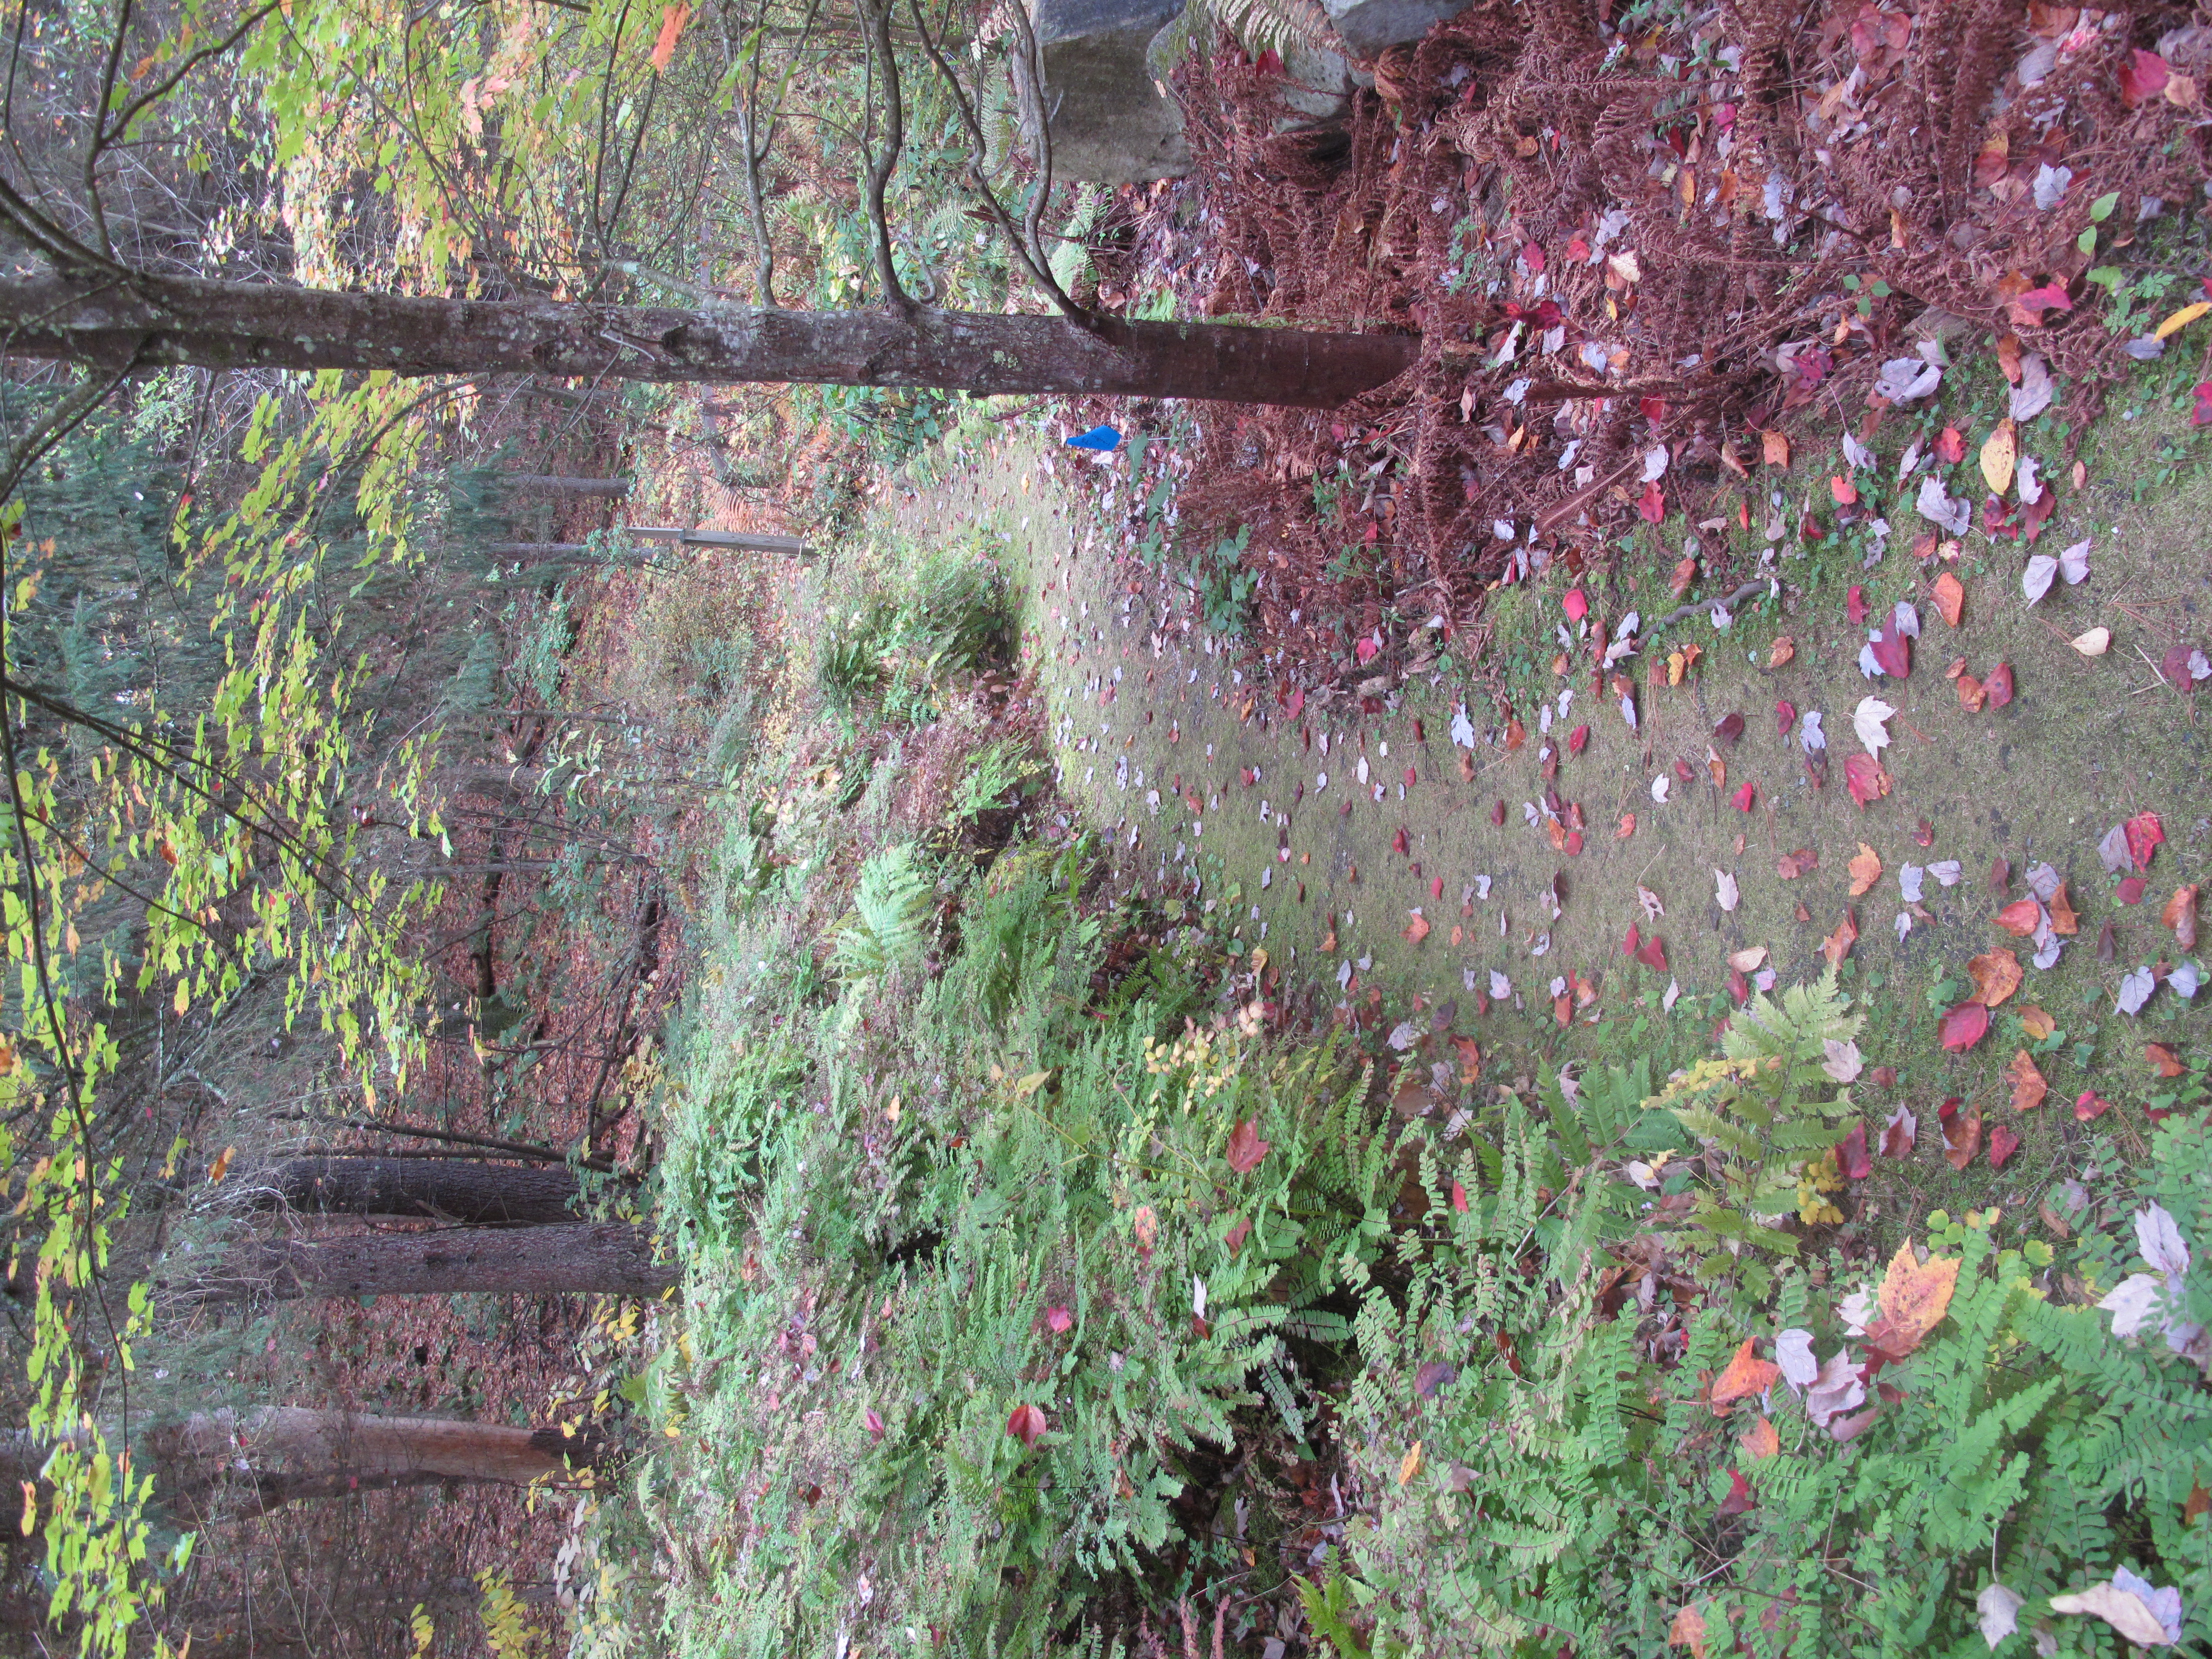 Image of trail in the woods with fallen autumn leaves.